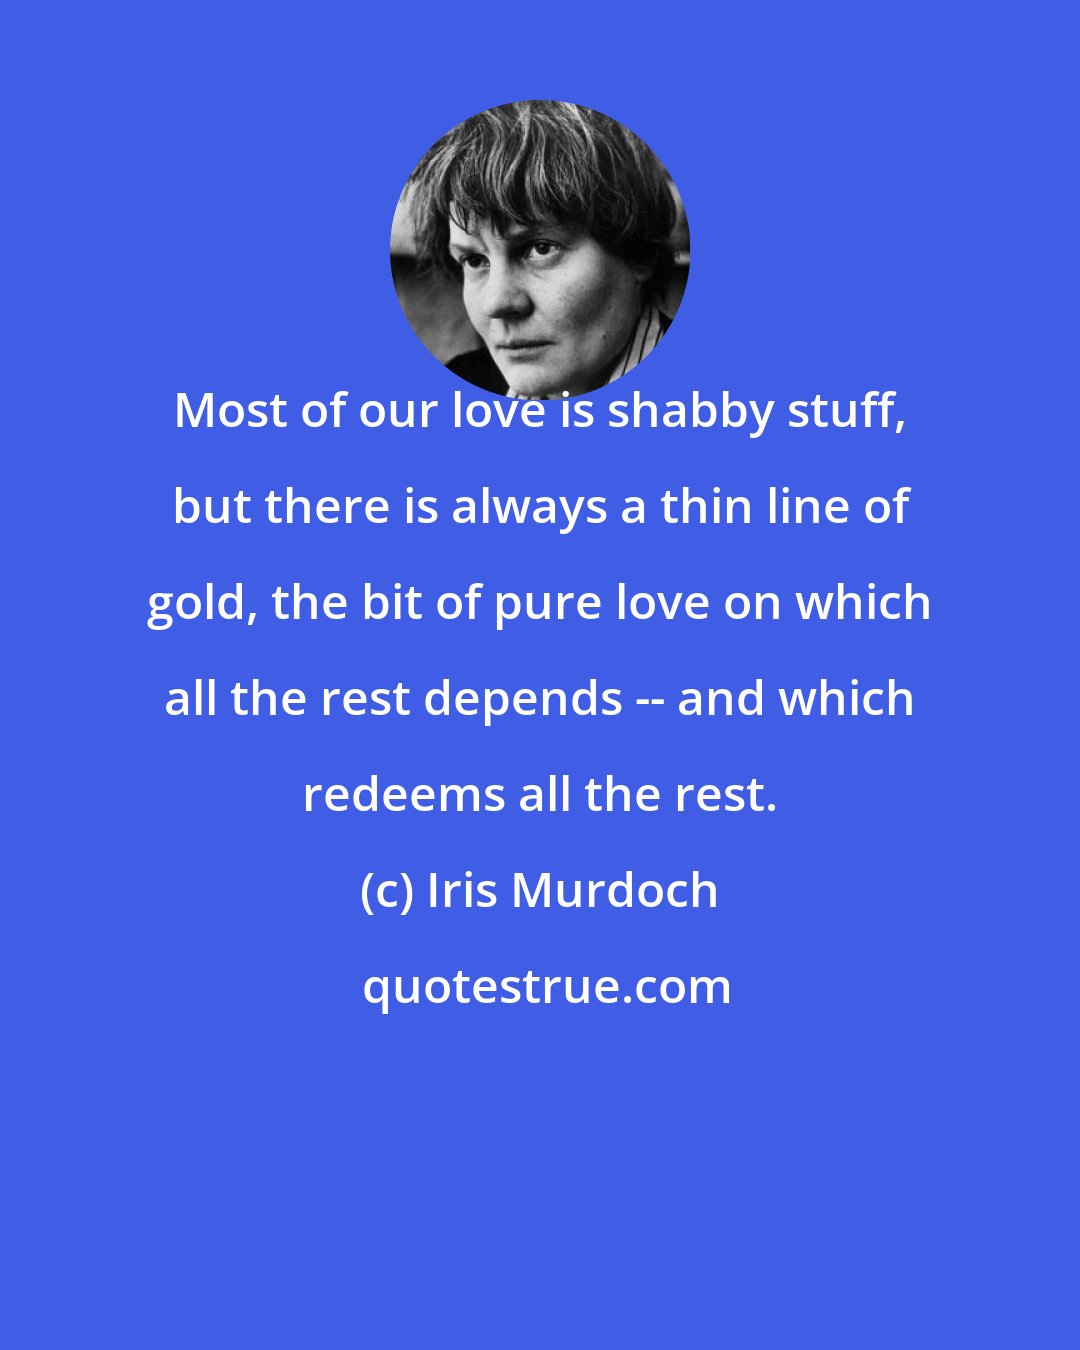 Iris Murdoch: Most of our love is shabby stuff, but there is always a thin line of gold, the bit of pure love on which all the rest depends -- and which redeems all the rest.